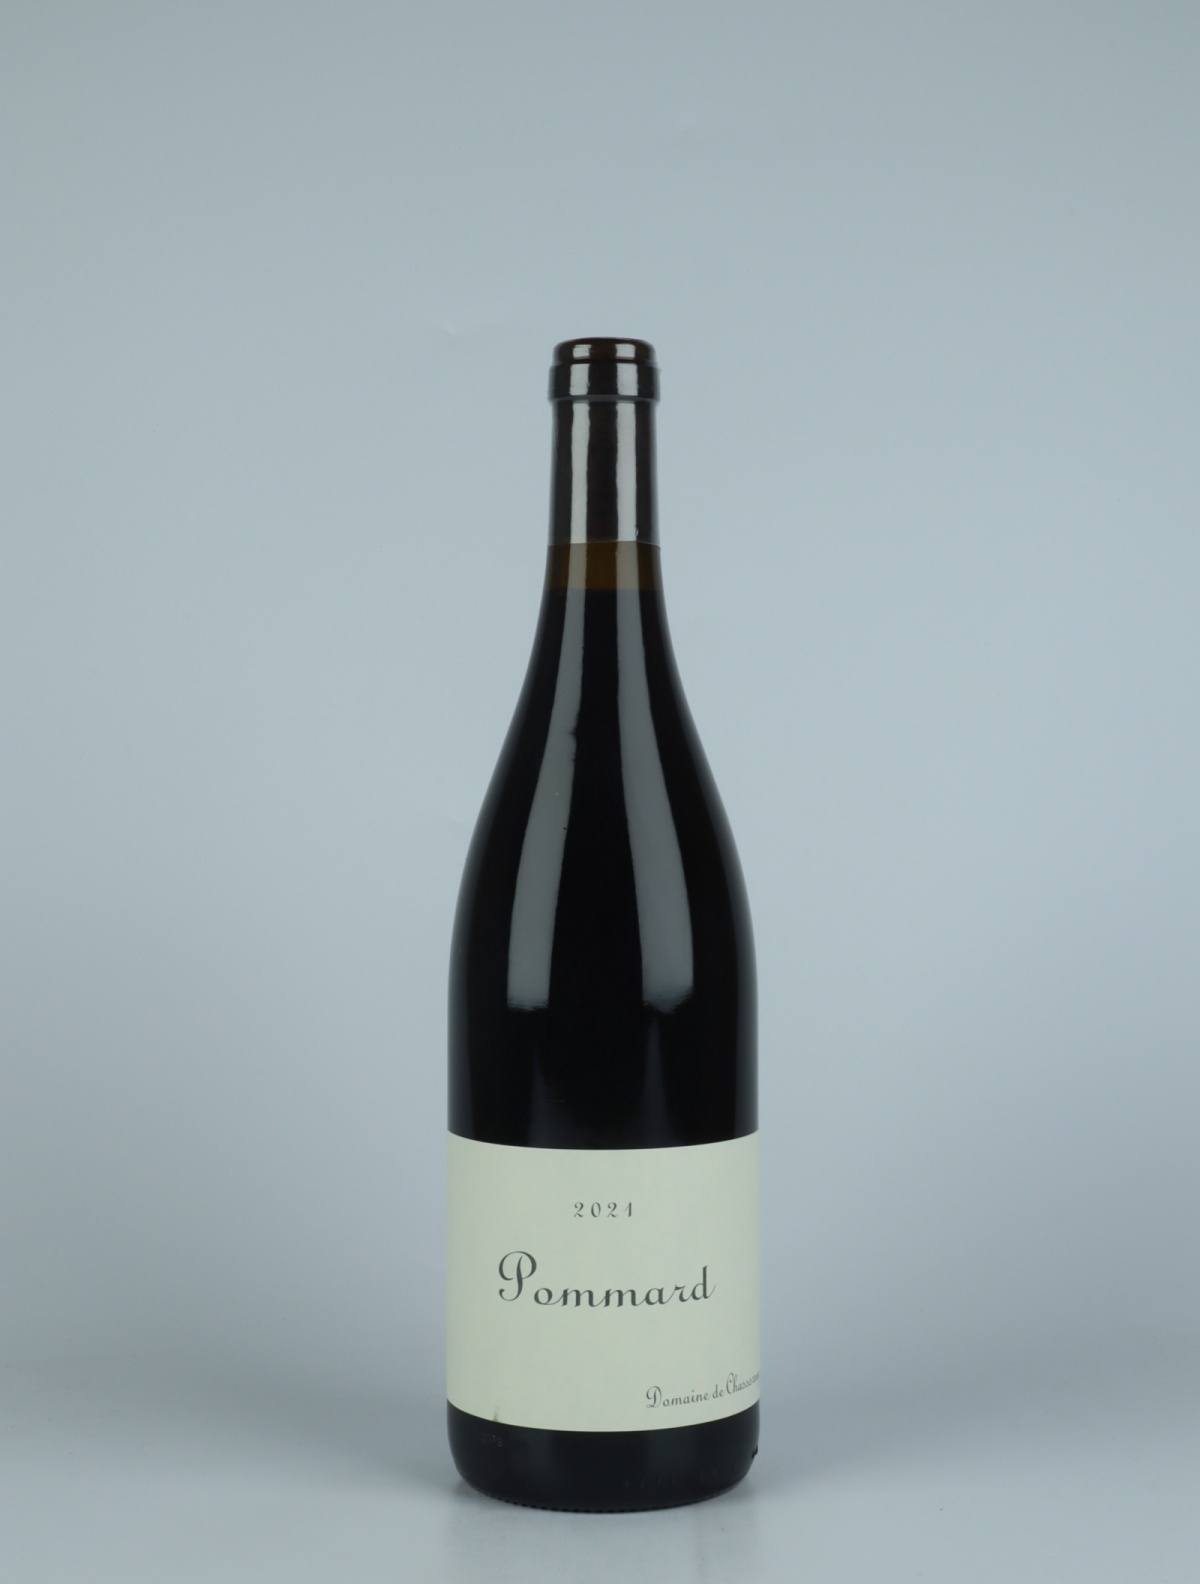 A bottle 2021 Pommard Red wine from Domaine de Chassorney, Burgundy in France